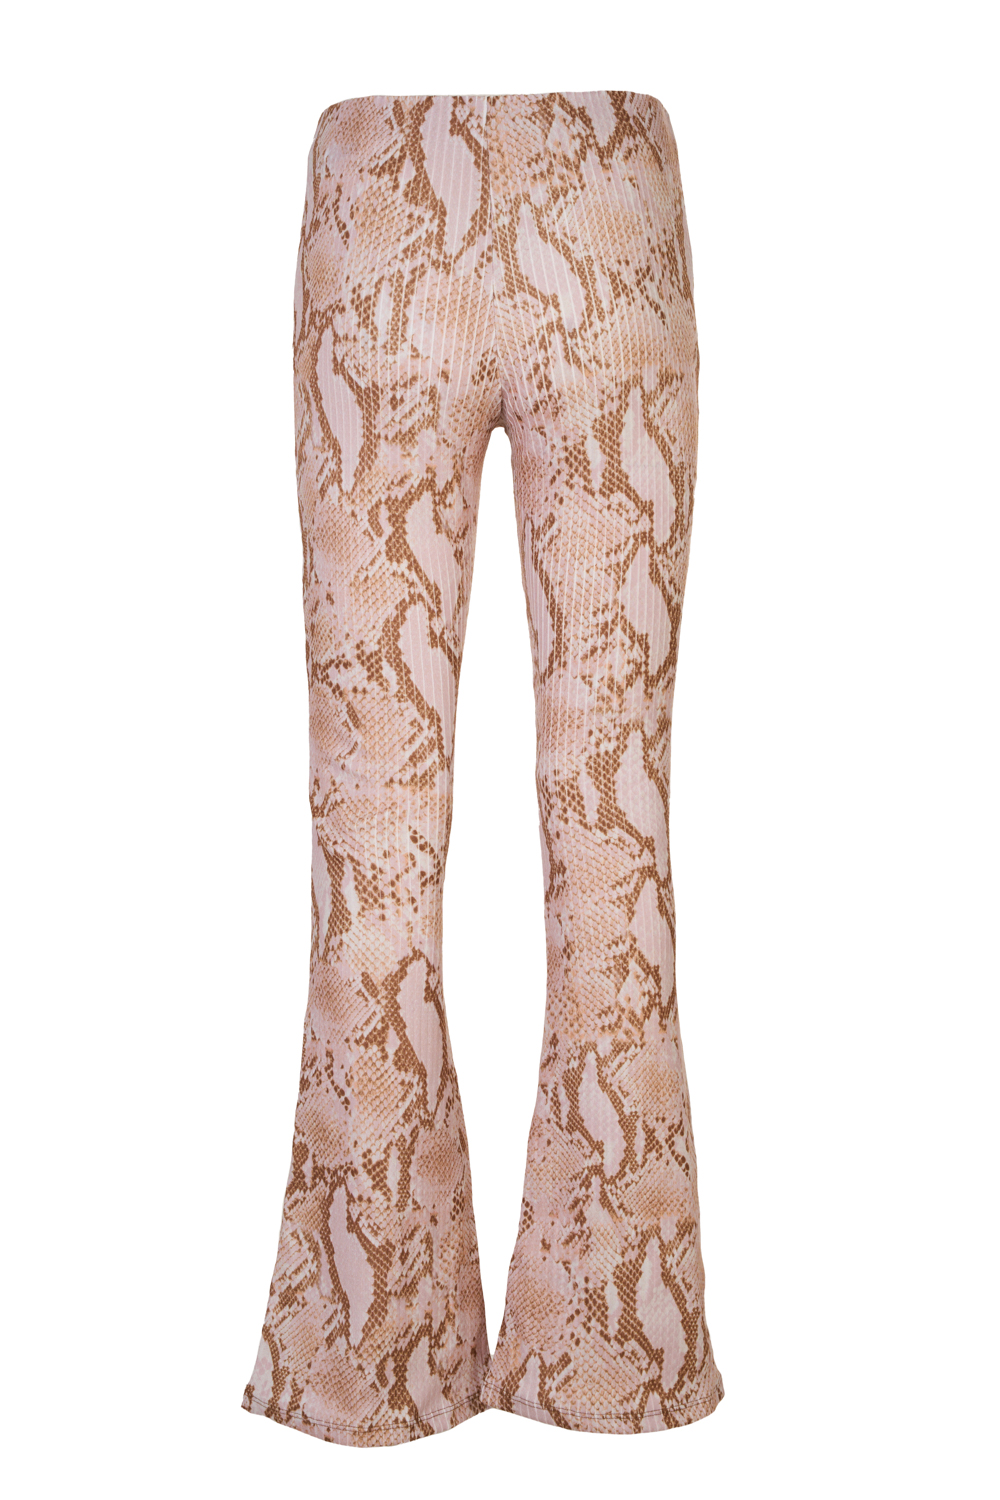 Flared Jersey Patterned Trousers with Elasticated Waistband (Guess)